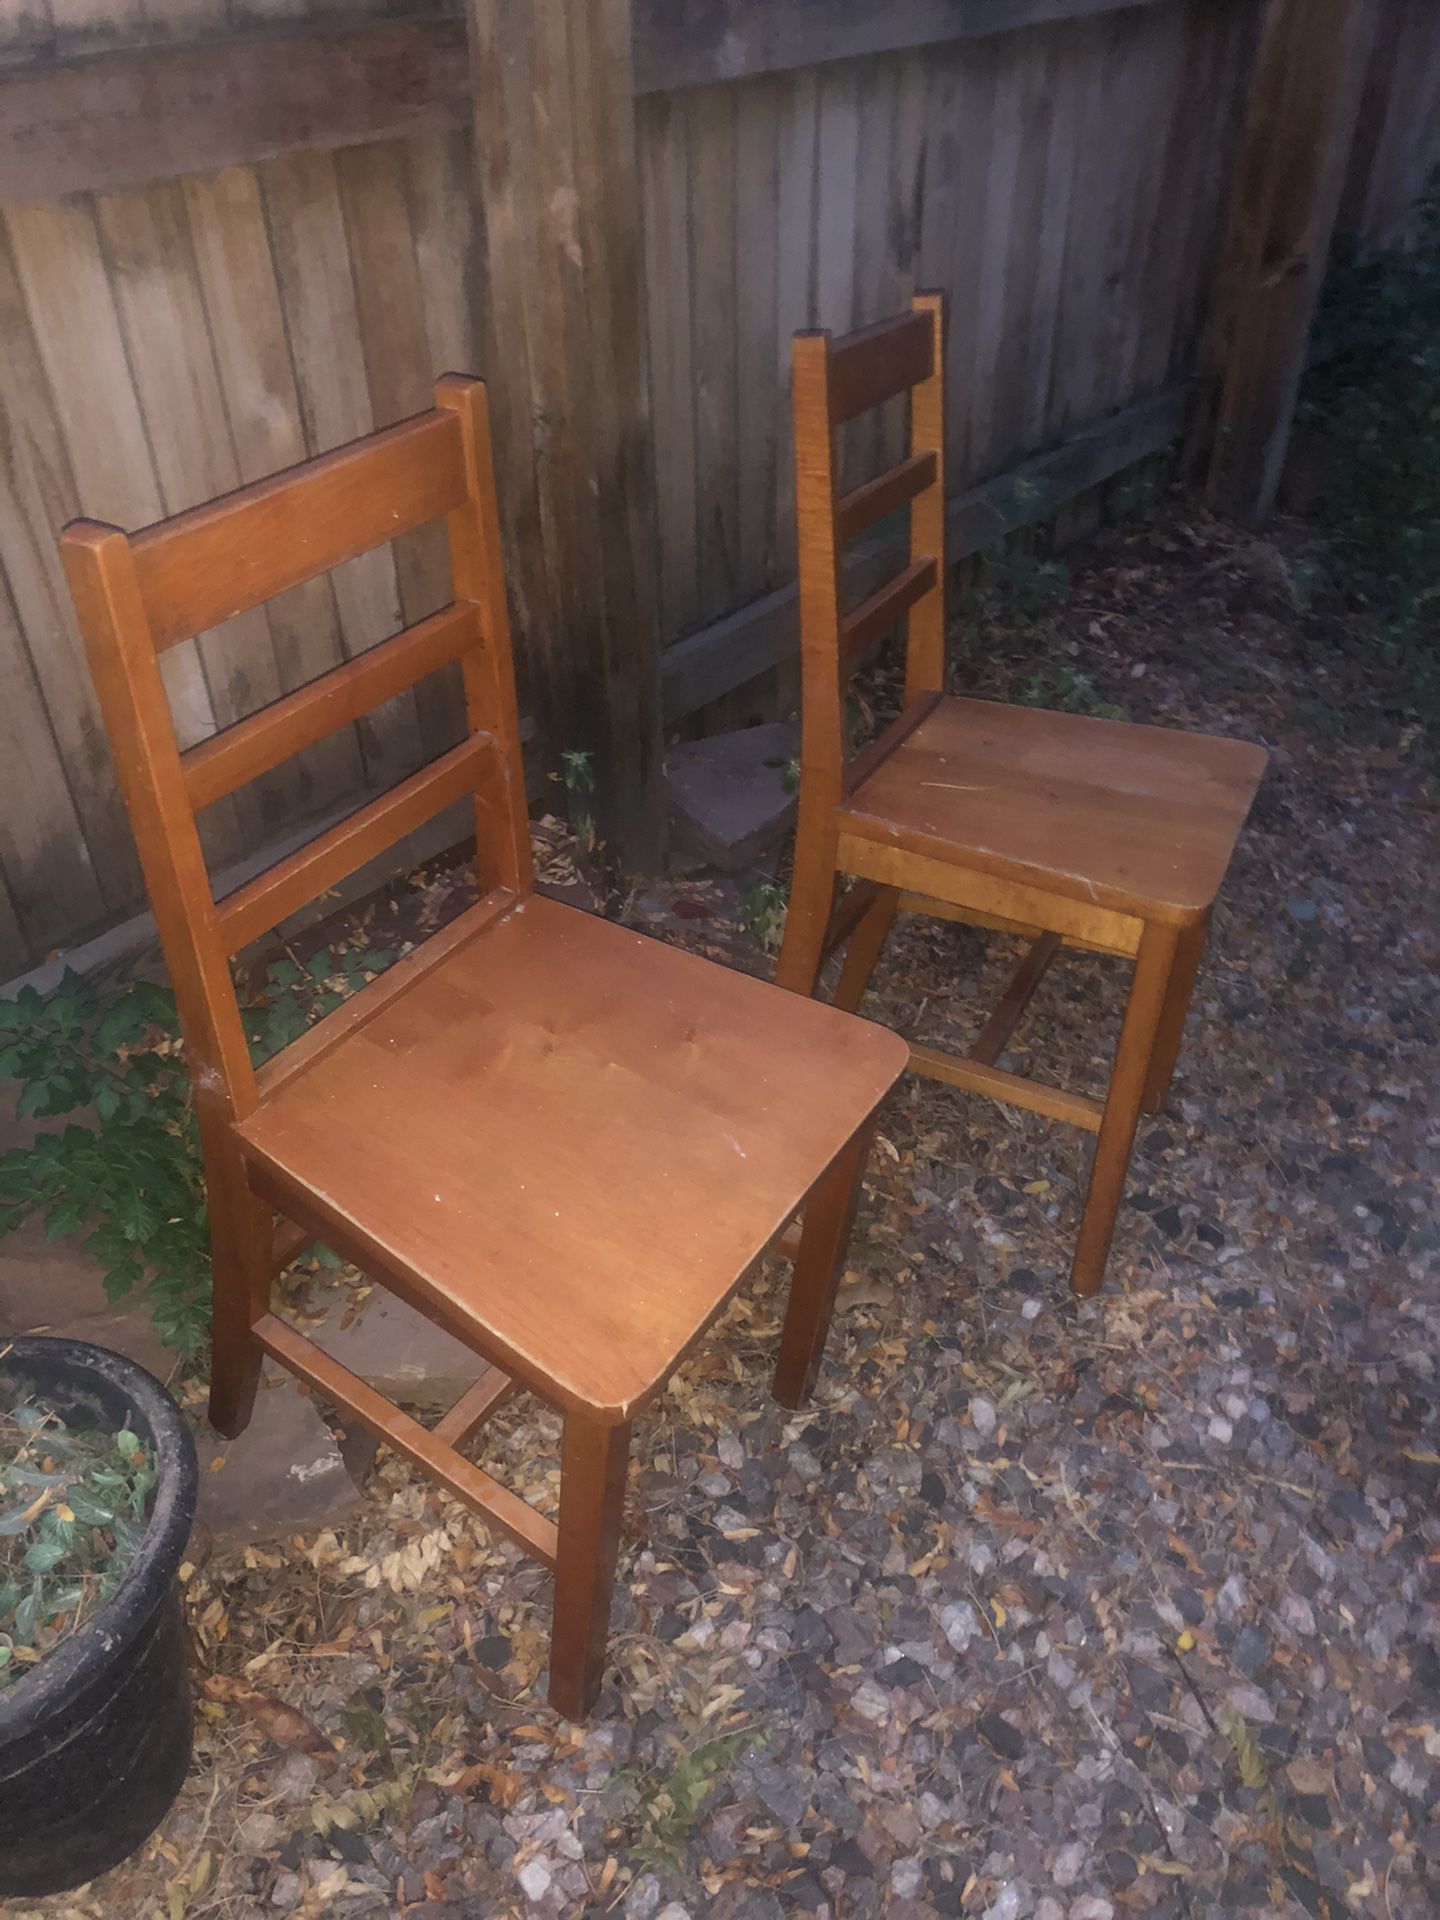 STOLEN by YOLI = Thief= YOLI !!!YOLI Stole these 2 , Antique Chairs $10 for the pair